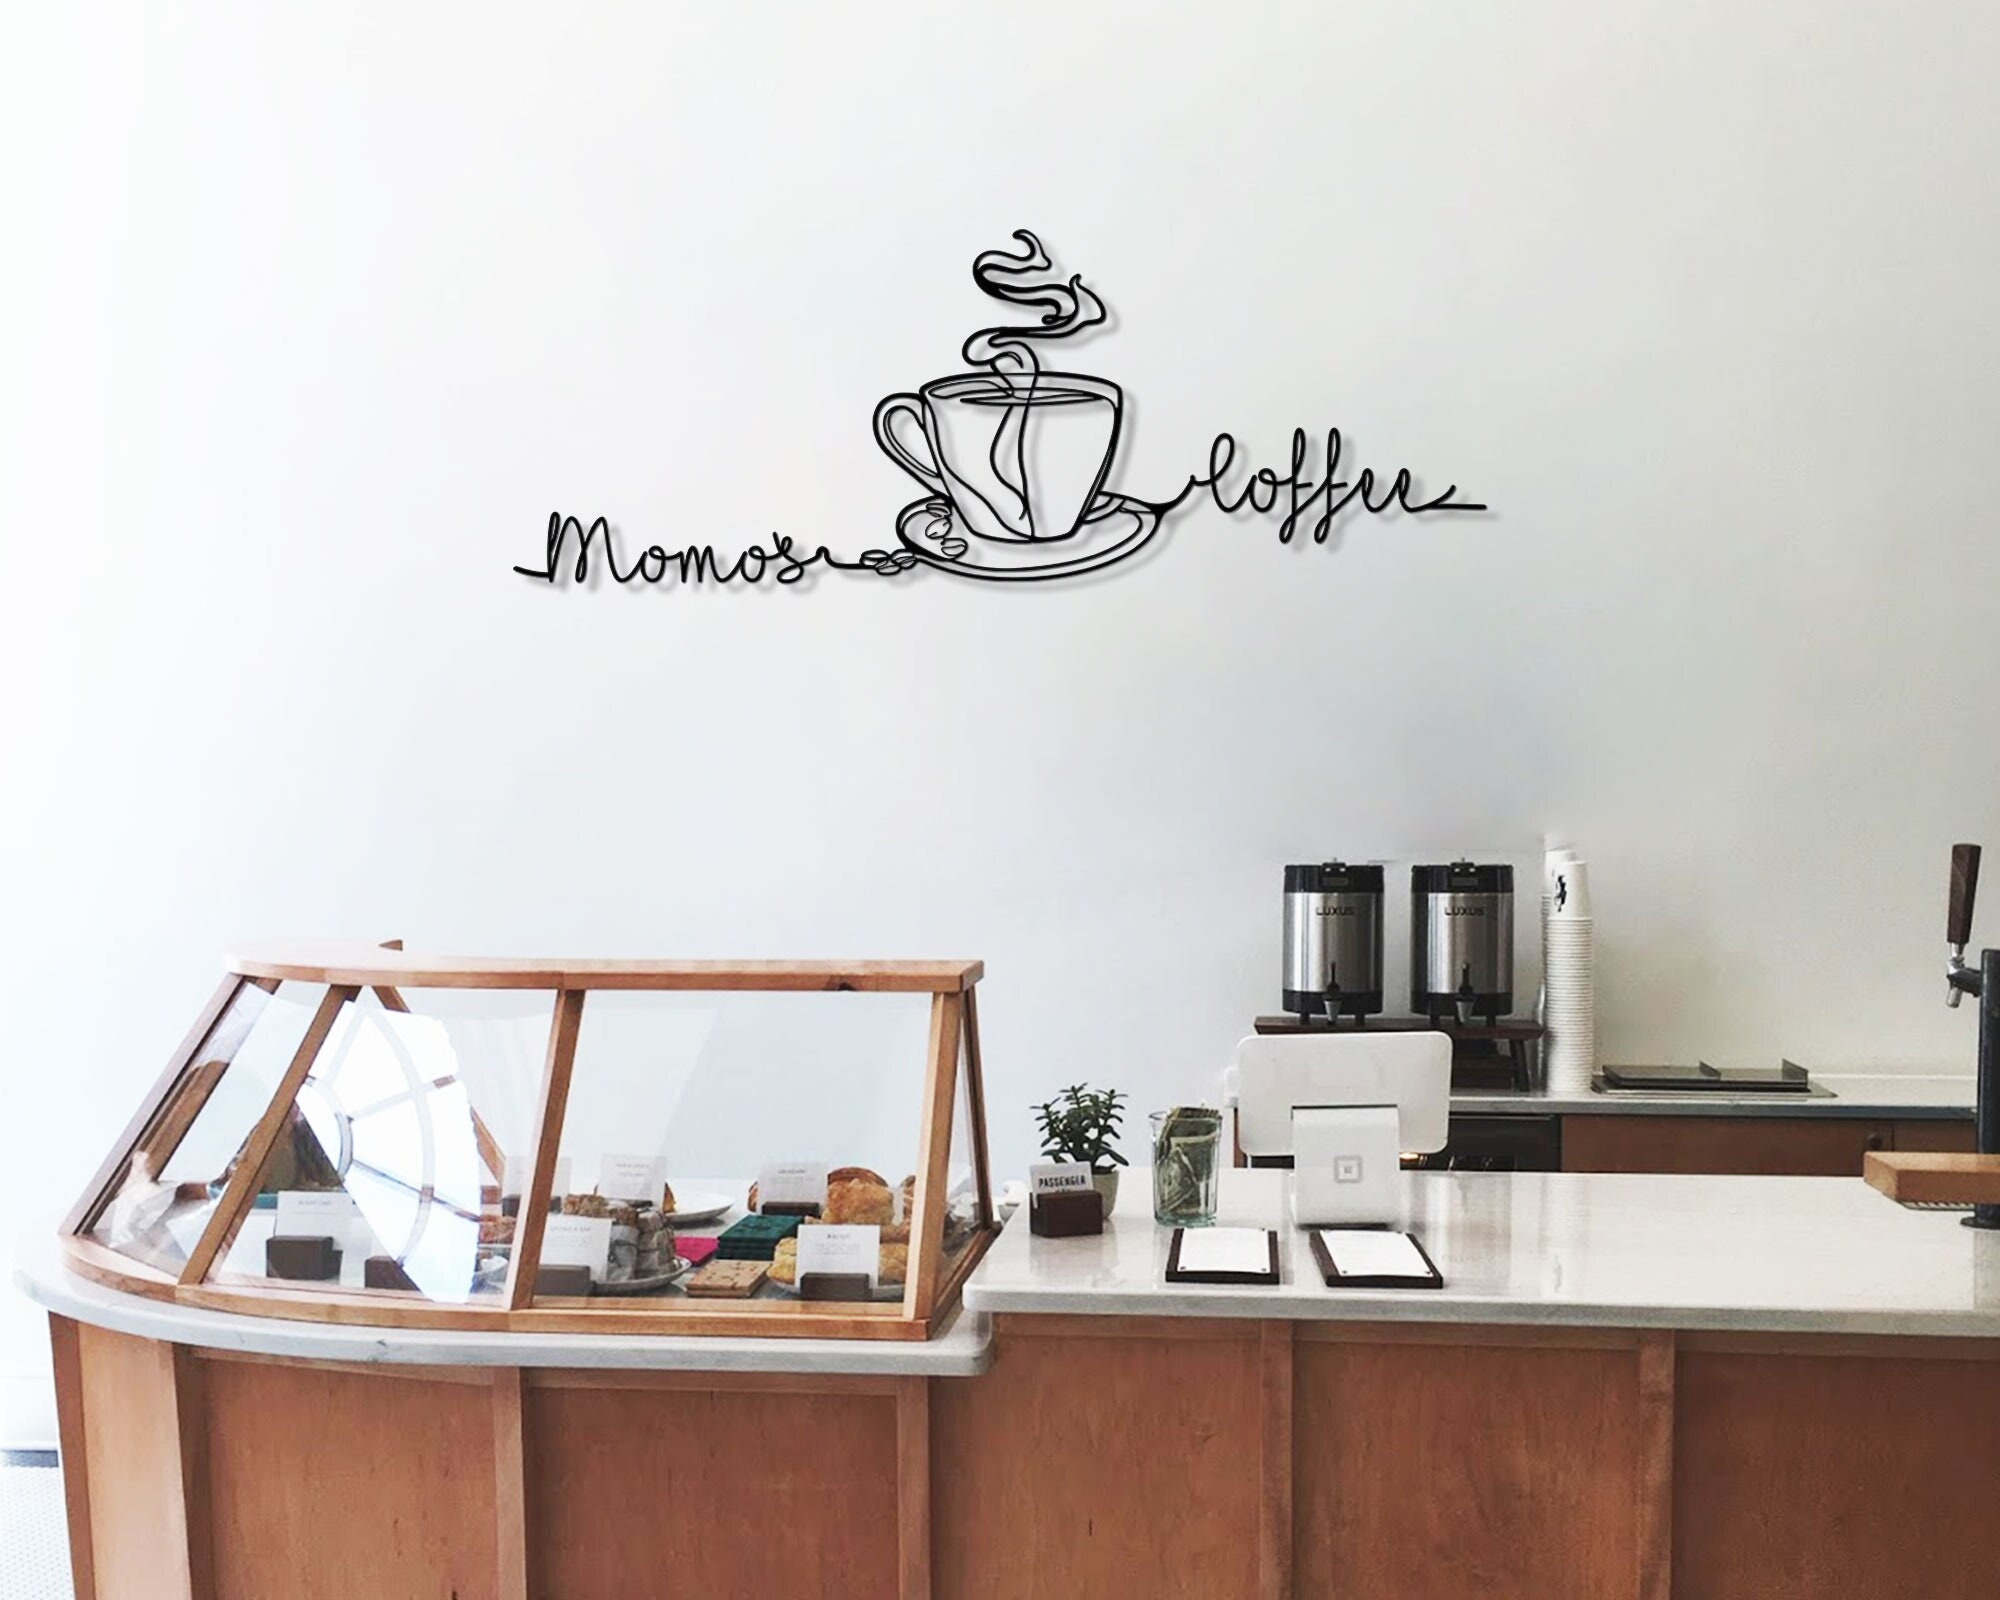  Metal Coffee Cup Wall Art Decor Wire Coffee Sign Wall Cafe  Themed Wall Art Decoration For Coffee Shop Kitchen Restaurant Metal Wall  Sign: Home & Kitchen